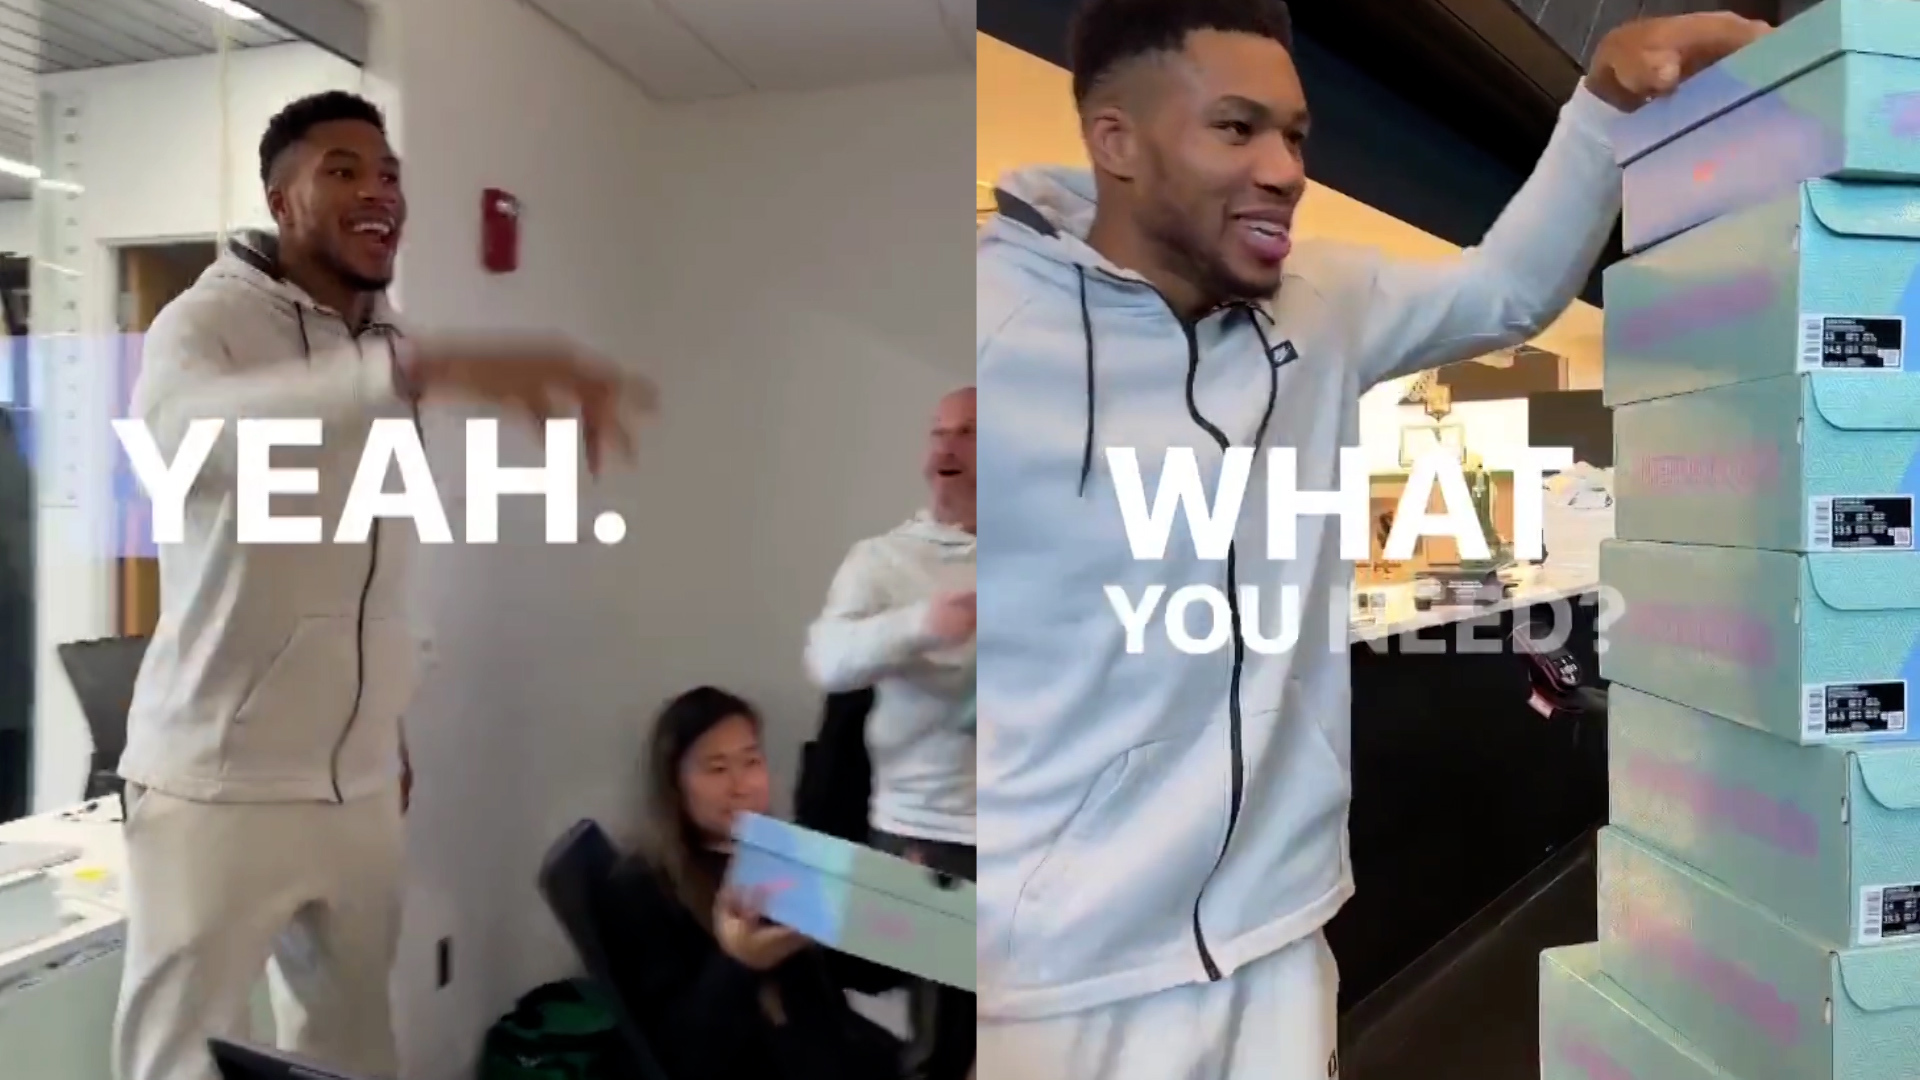 Giannis Antetokounmpo is MVP both on and off the court: gifts hundreds of sneakers to teammates and staff